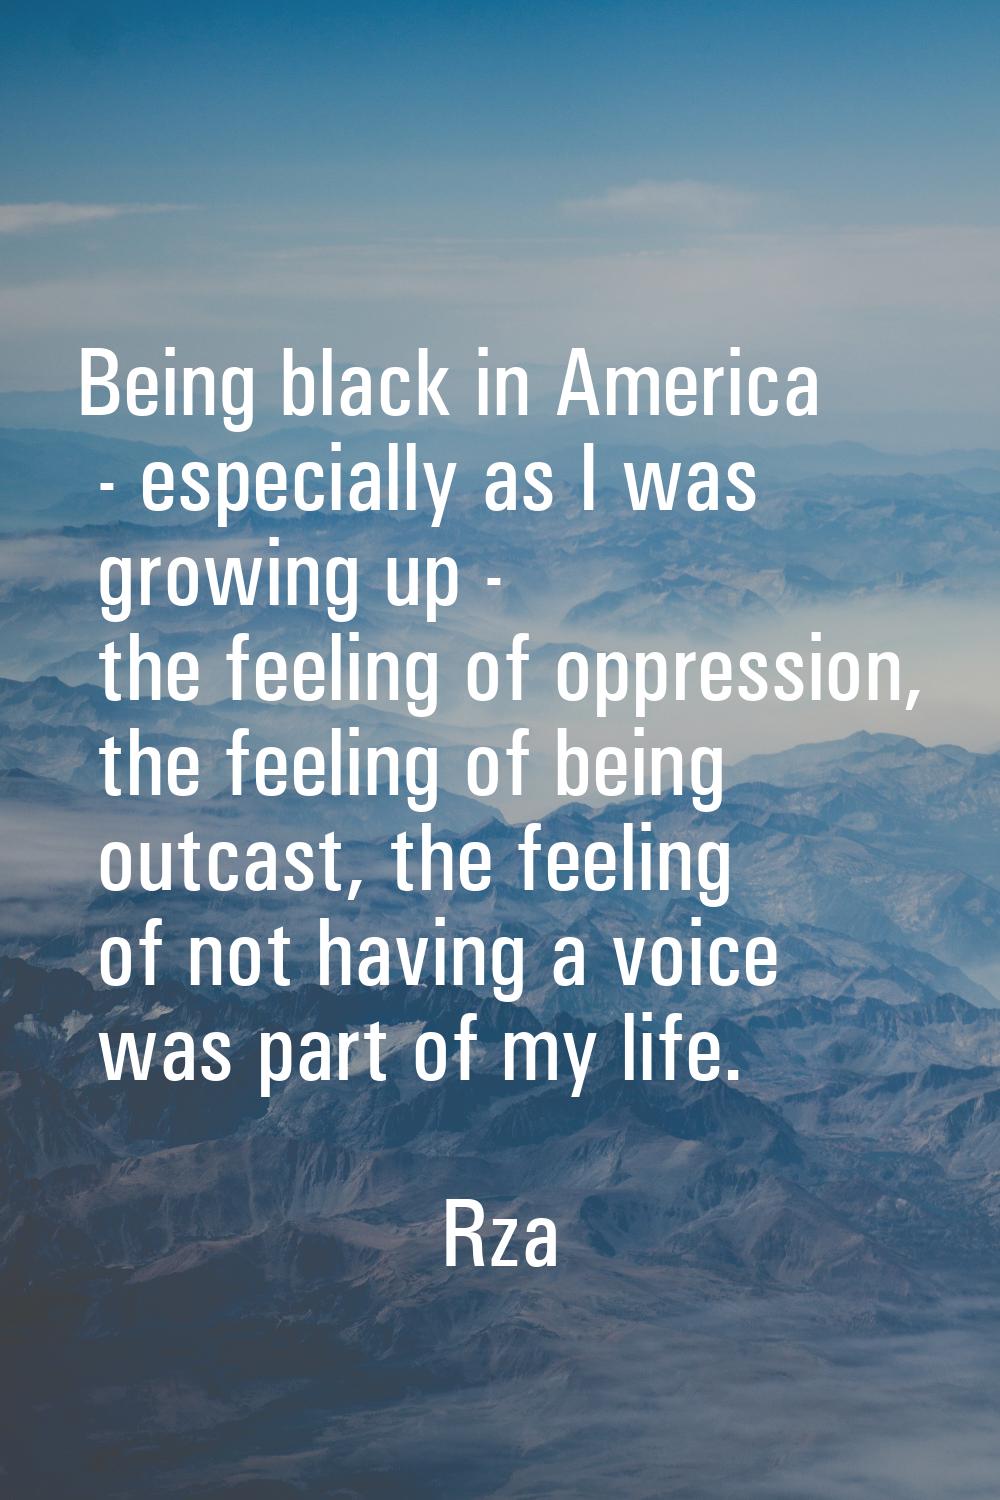 Being black in America - especially as I was growing up - the feeling of oppression, the feeling of